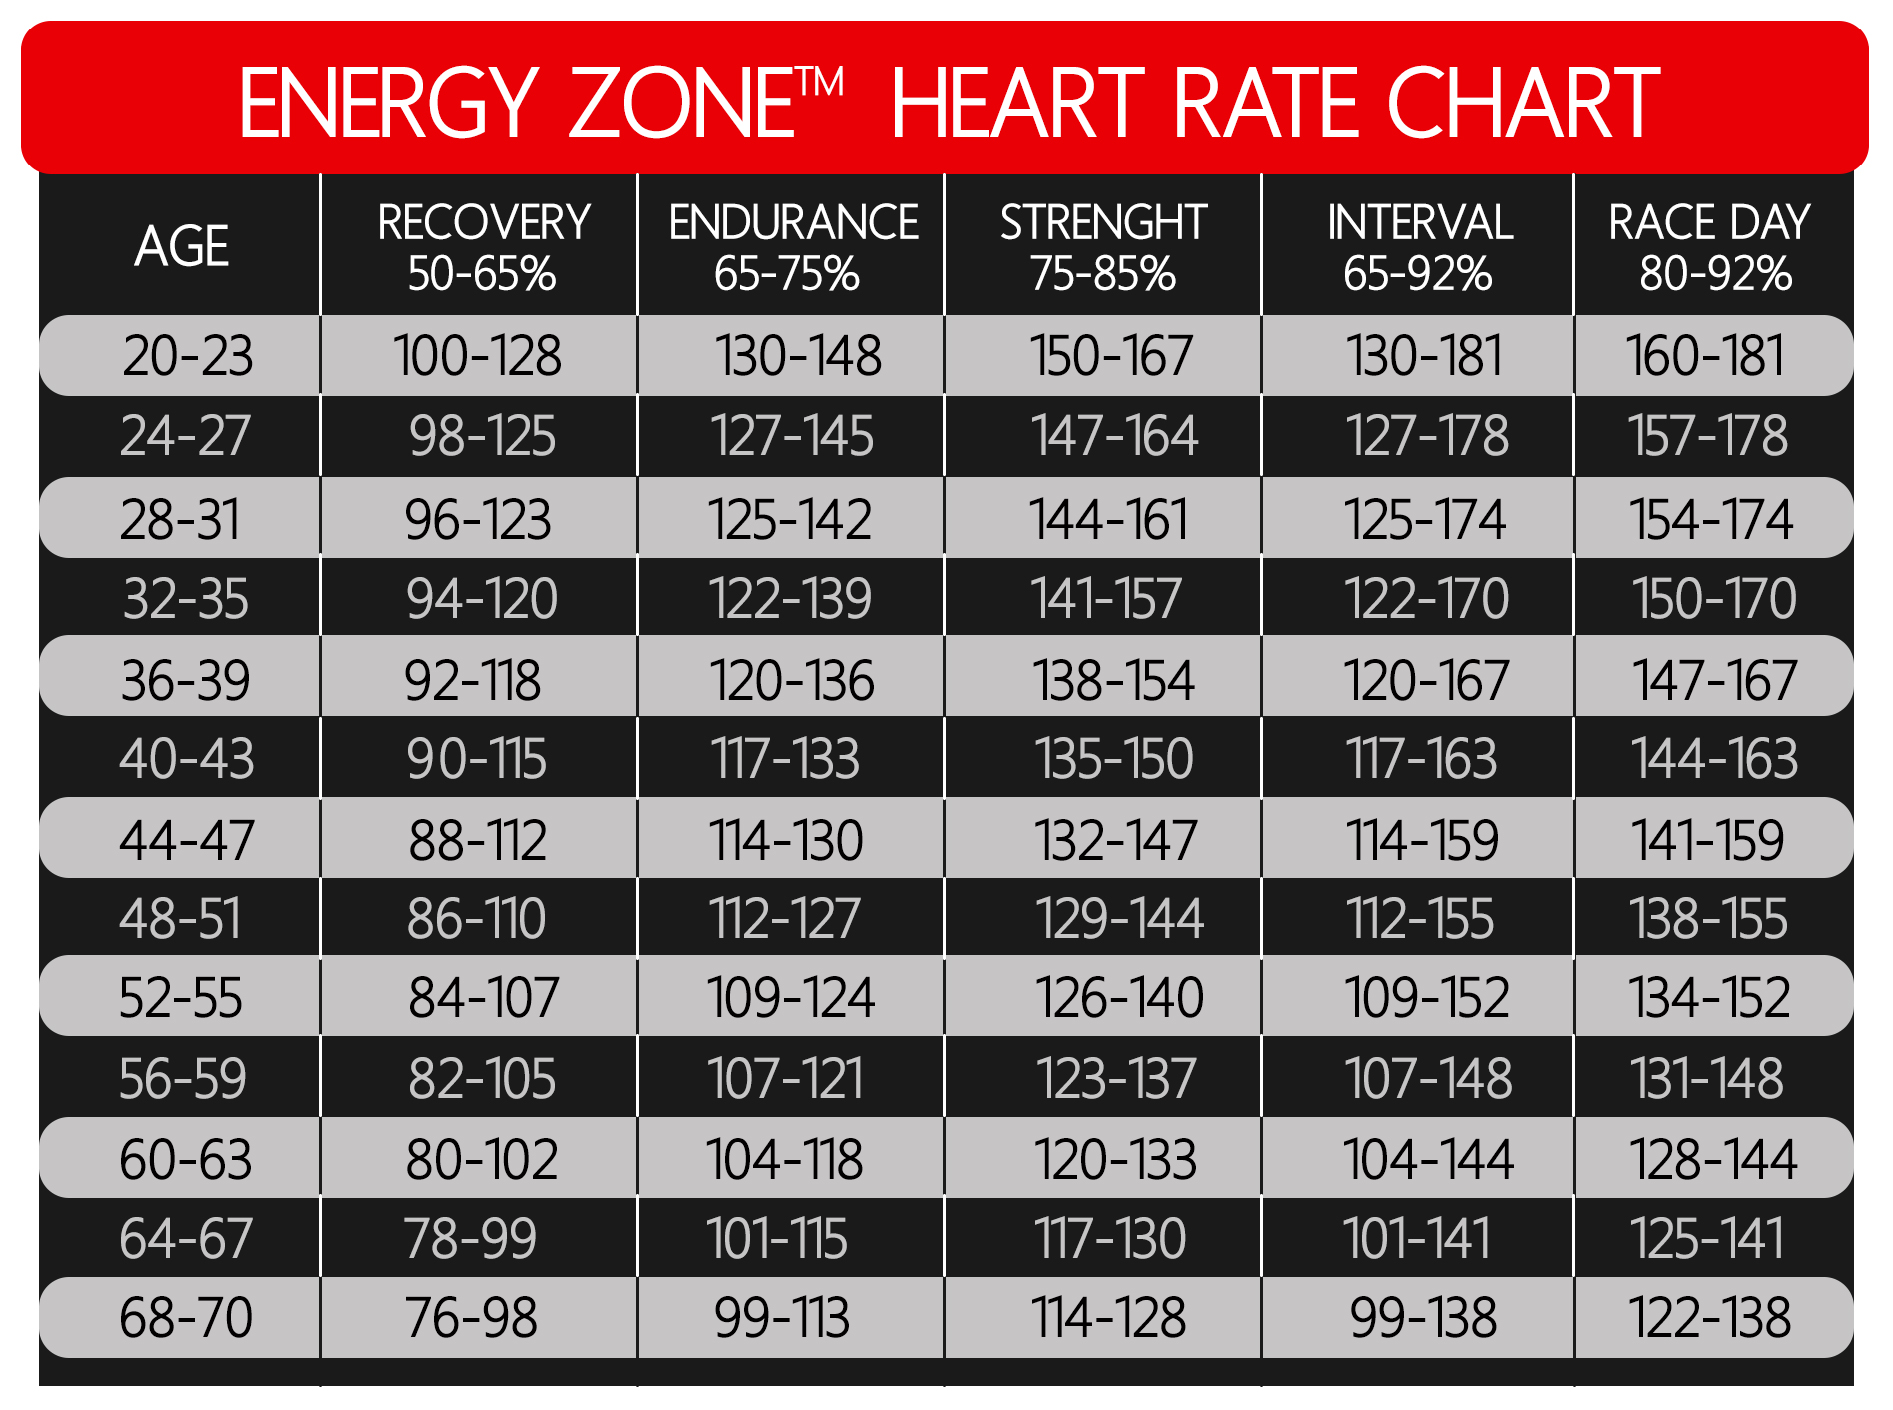 A Quick Reference Guide To Spinning Energy Zones For Heart Rate in The Stylish and Attractive cycling training program heart rate zones for Motivate